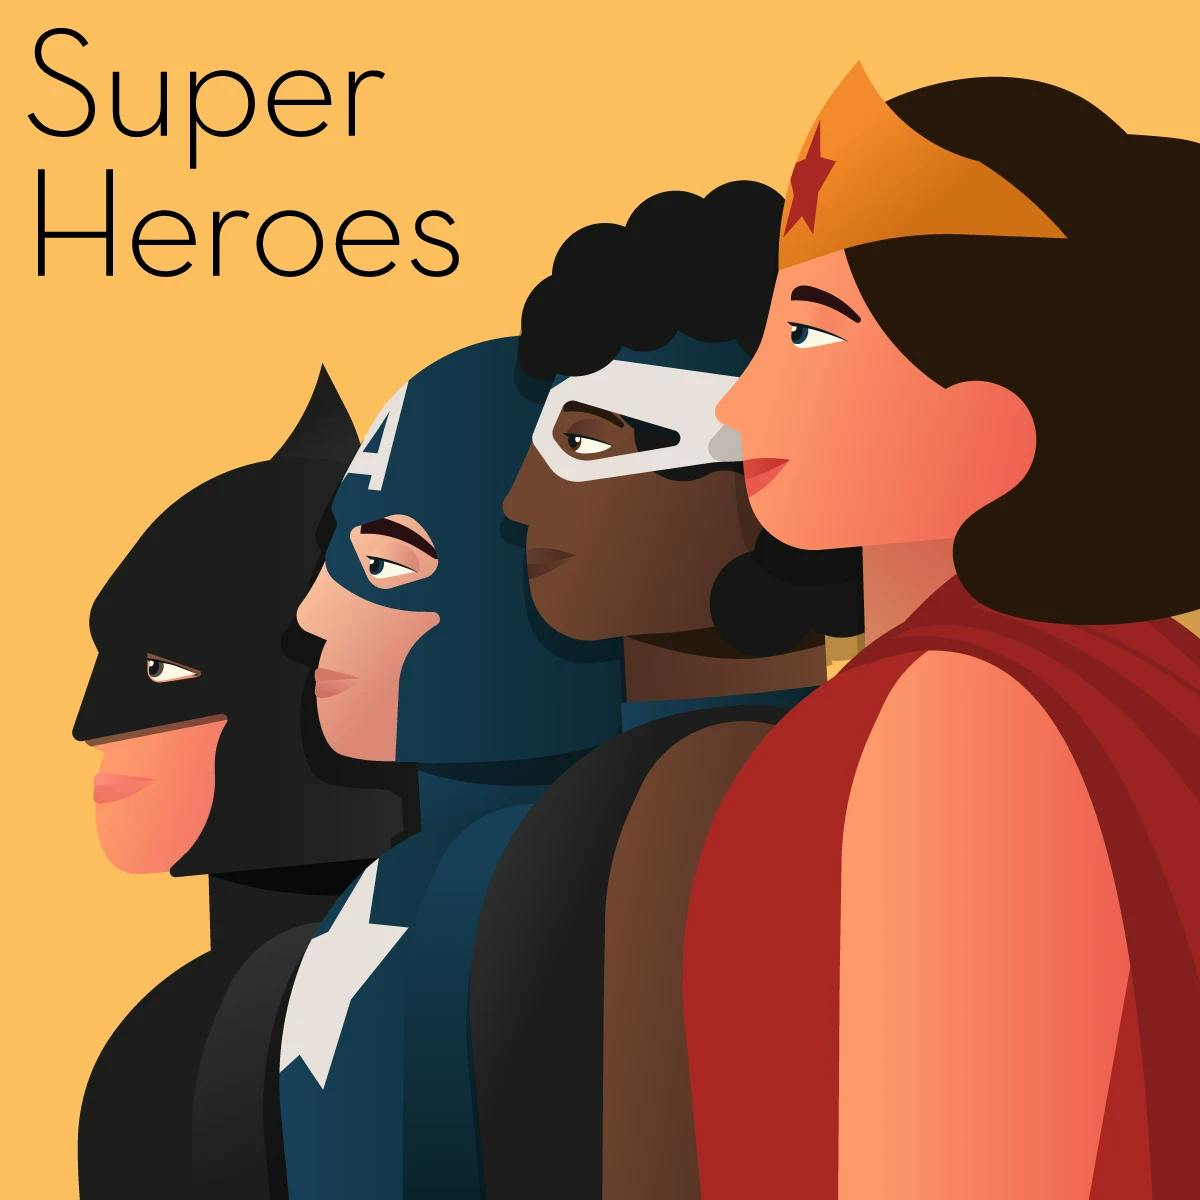 Illustration of a gift guide containing gifts for superhero fans.Illustration shows Batman, Captain America, General Okoye, and Wonder Woman. 